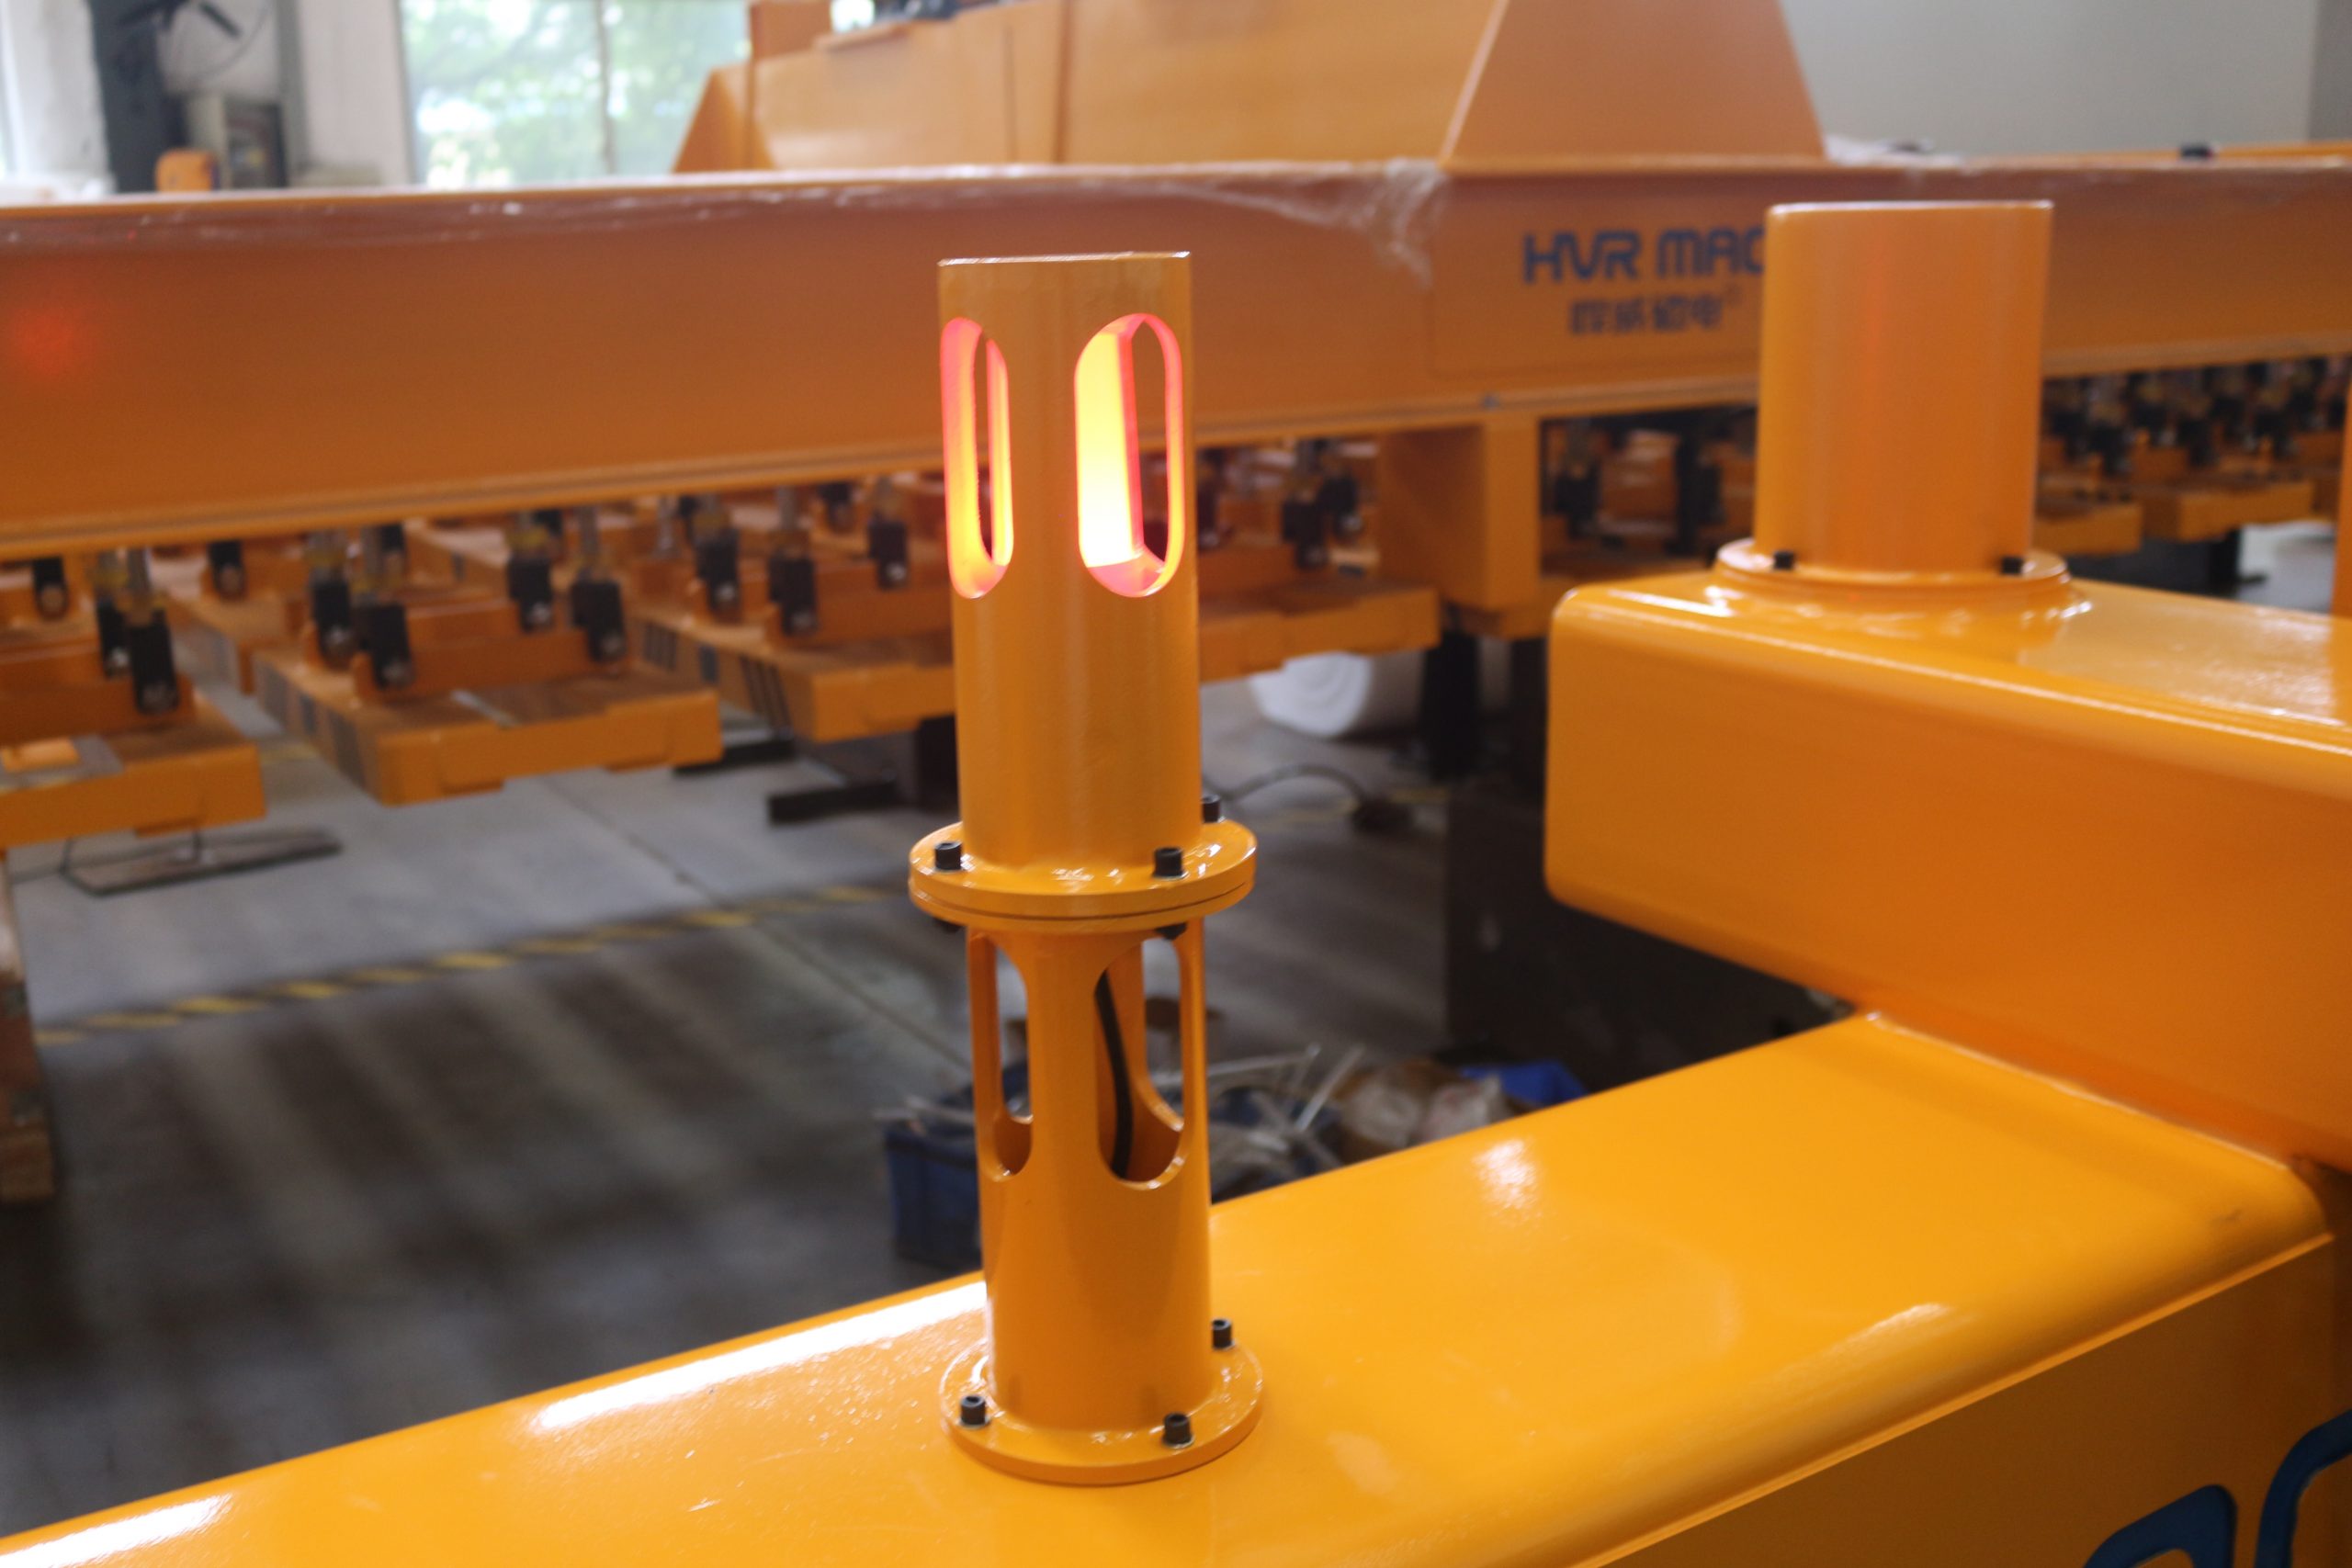 Lifting Magnet System with Safety Feature - Indicator Lamp | HVR MAG